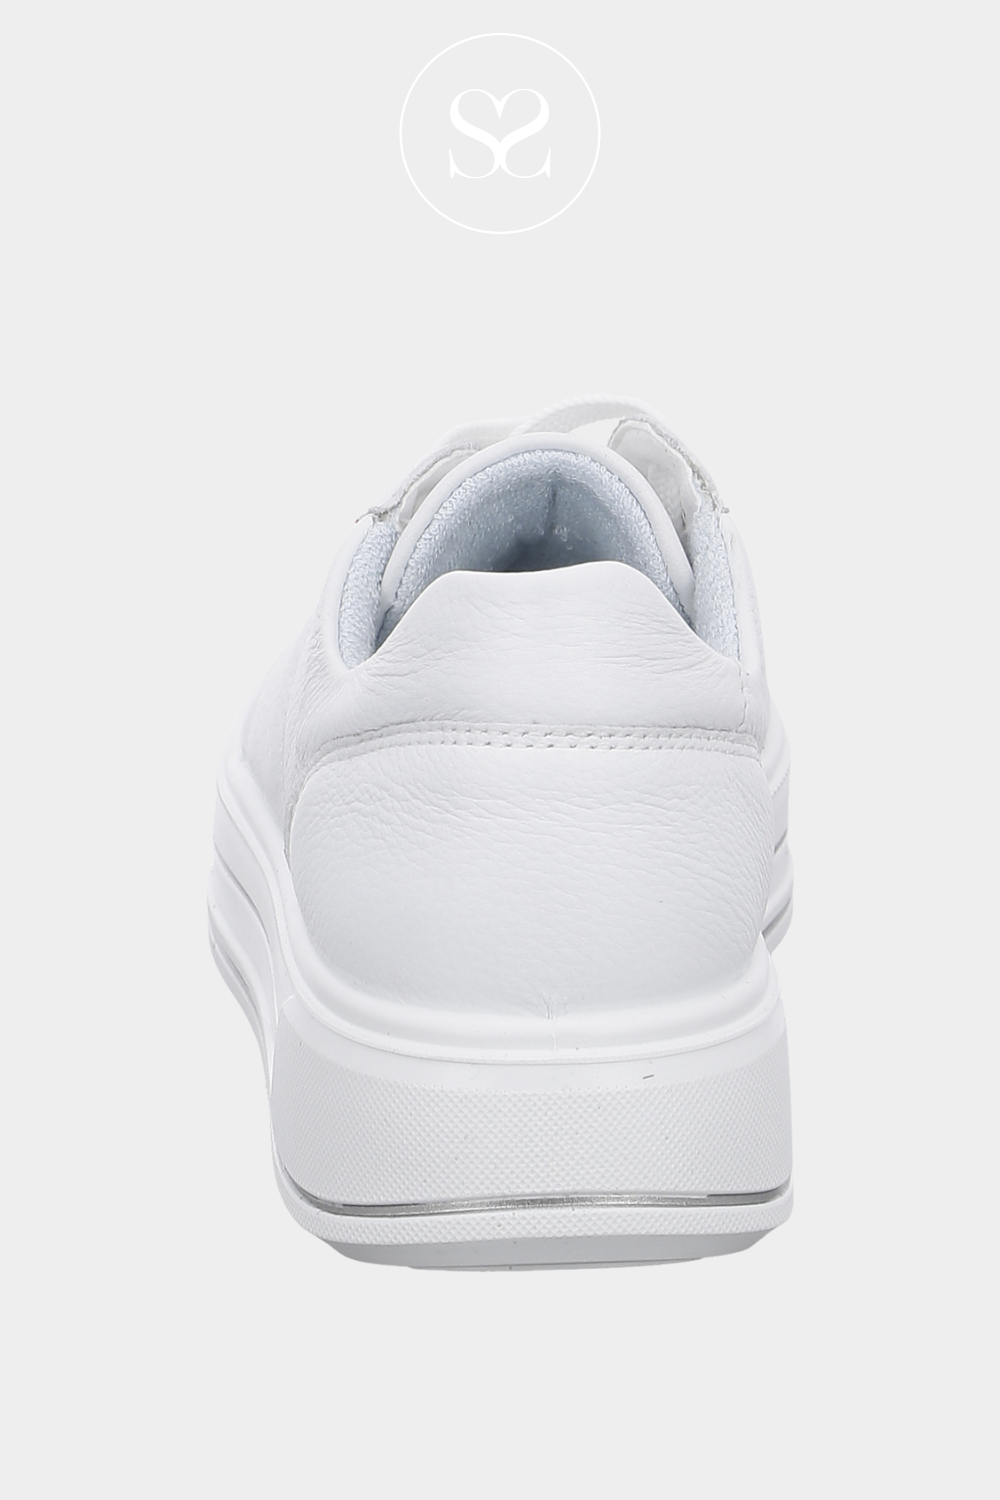 ARA 12-23001-04 WHITE LEATHER FLATFORM TRAINERS WITH LACES AND WHITE PANELLING